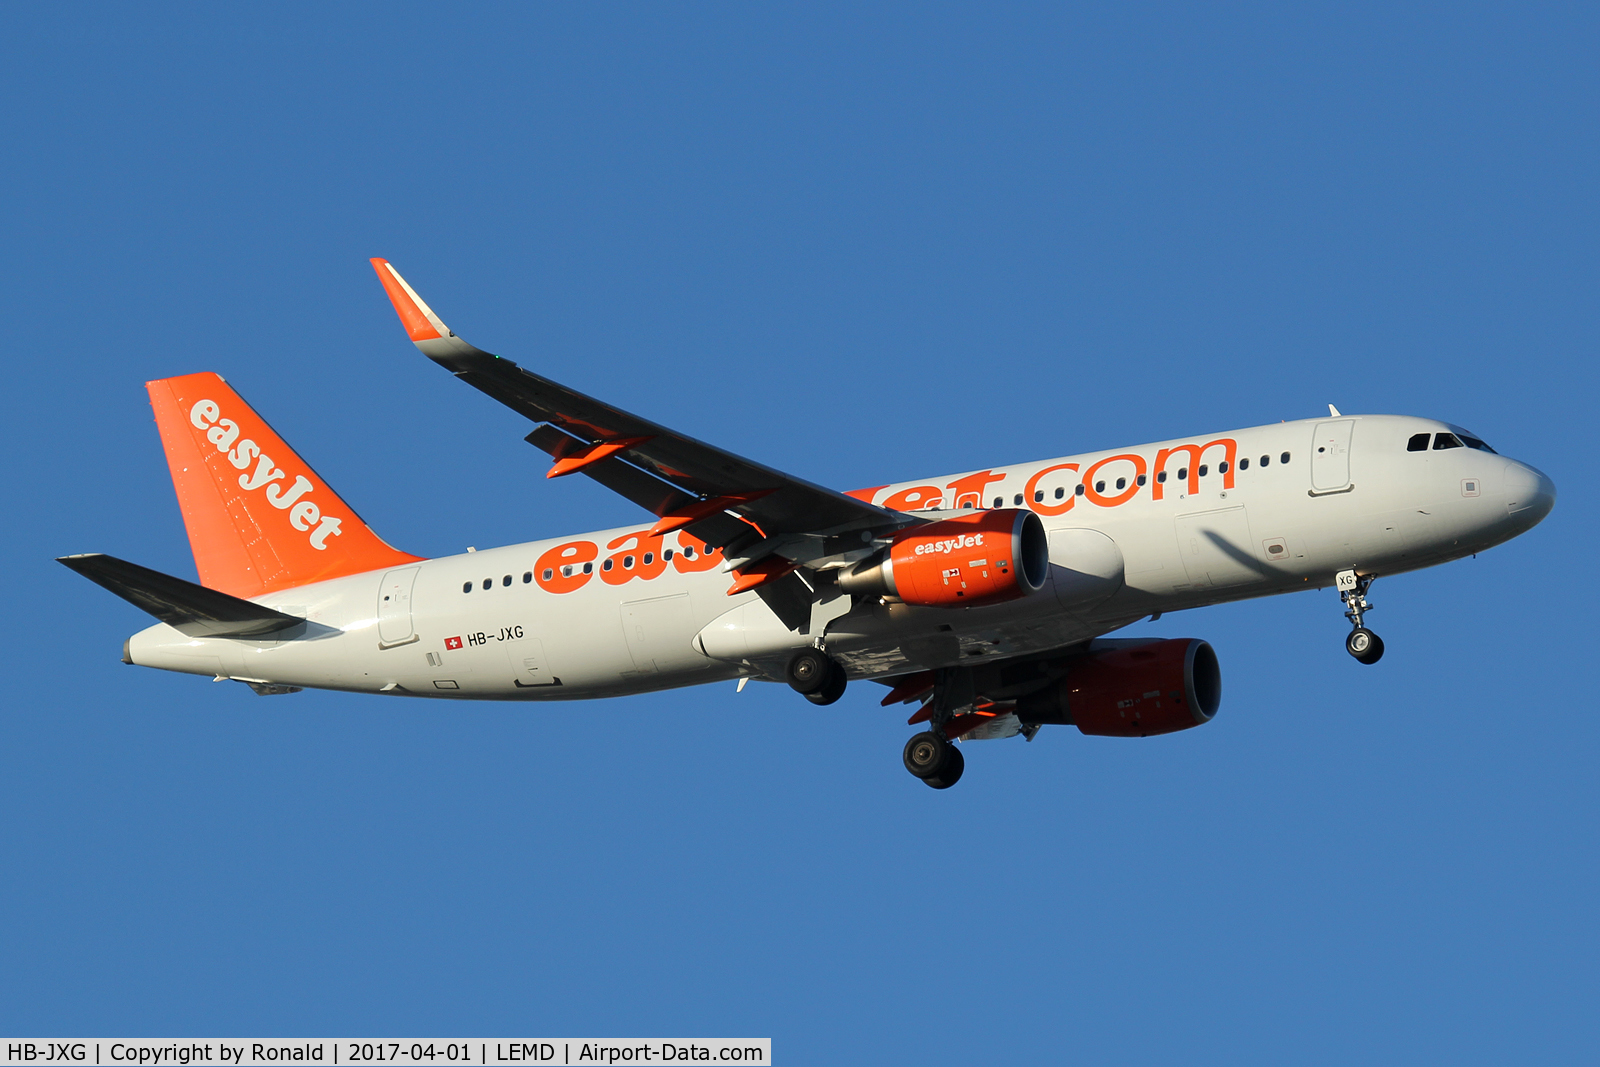 HB-JXG, 2013 Airbus A320-214 C/N 5757, st mad